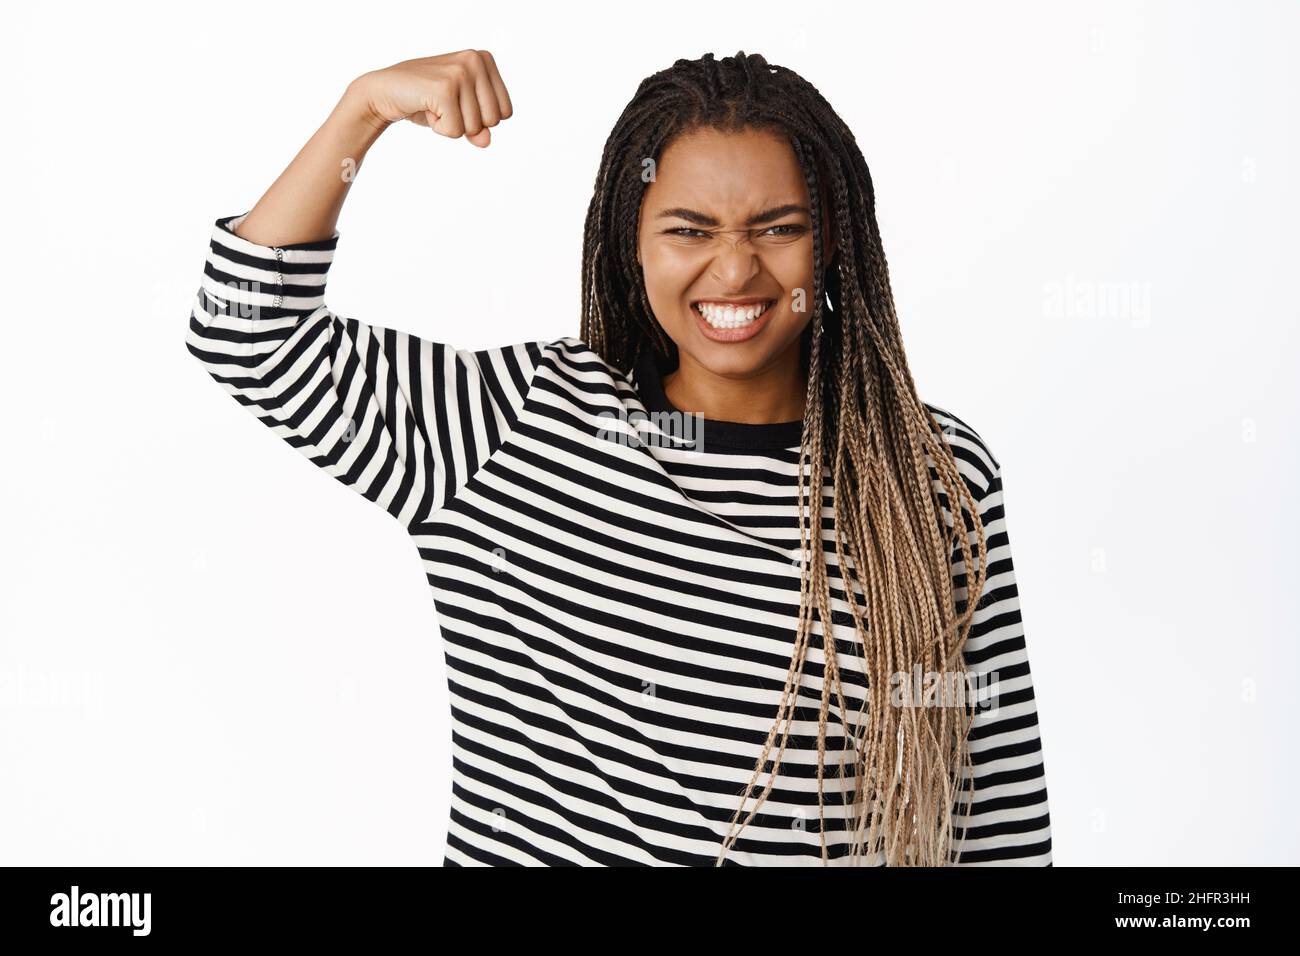 Women power and strength. Sassy black girl showing her muscles, flexing biceps on arm and clench teeth, making power pose, being strong and powerful Stock Photo